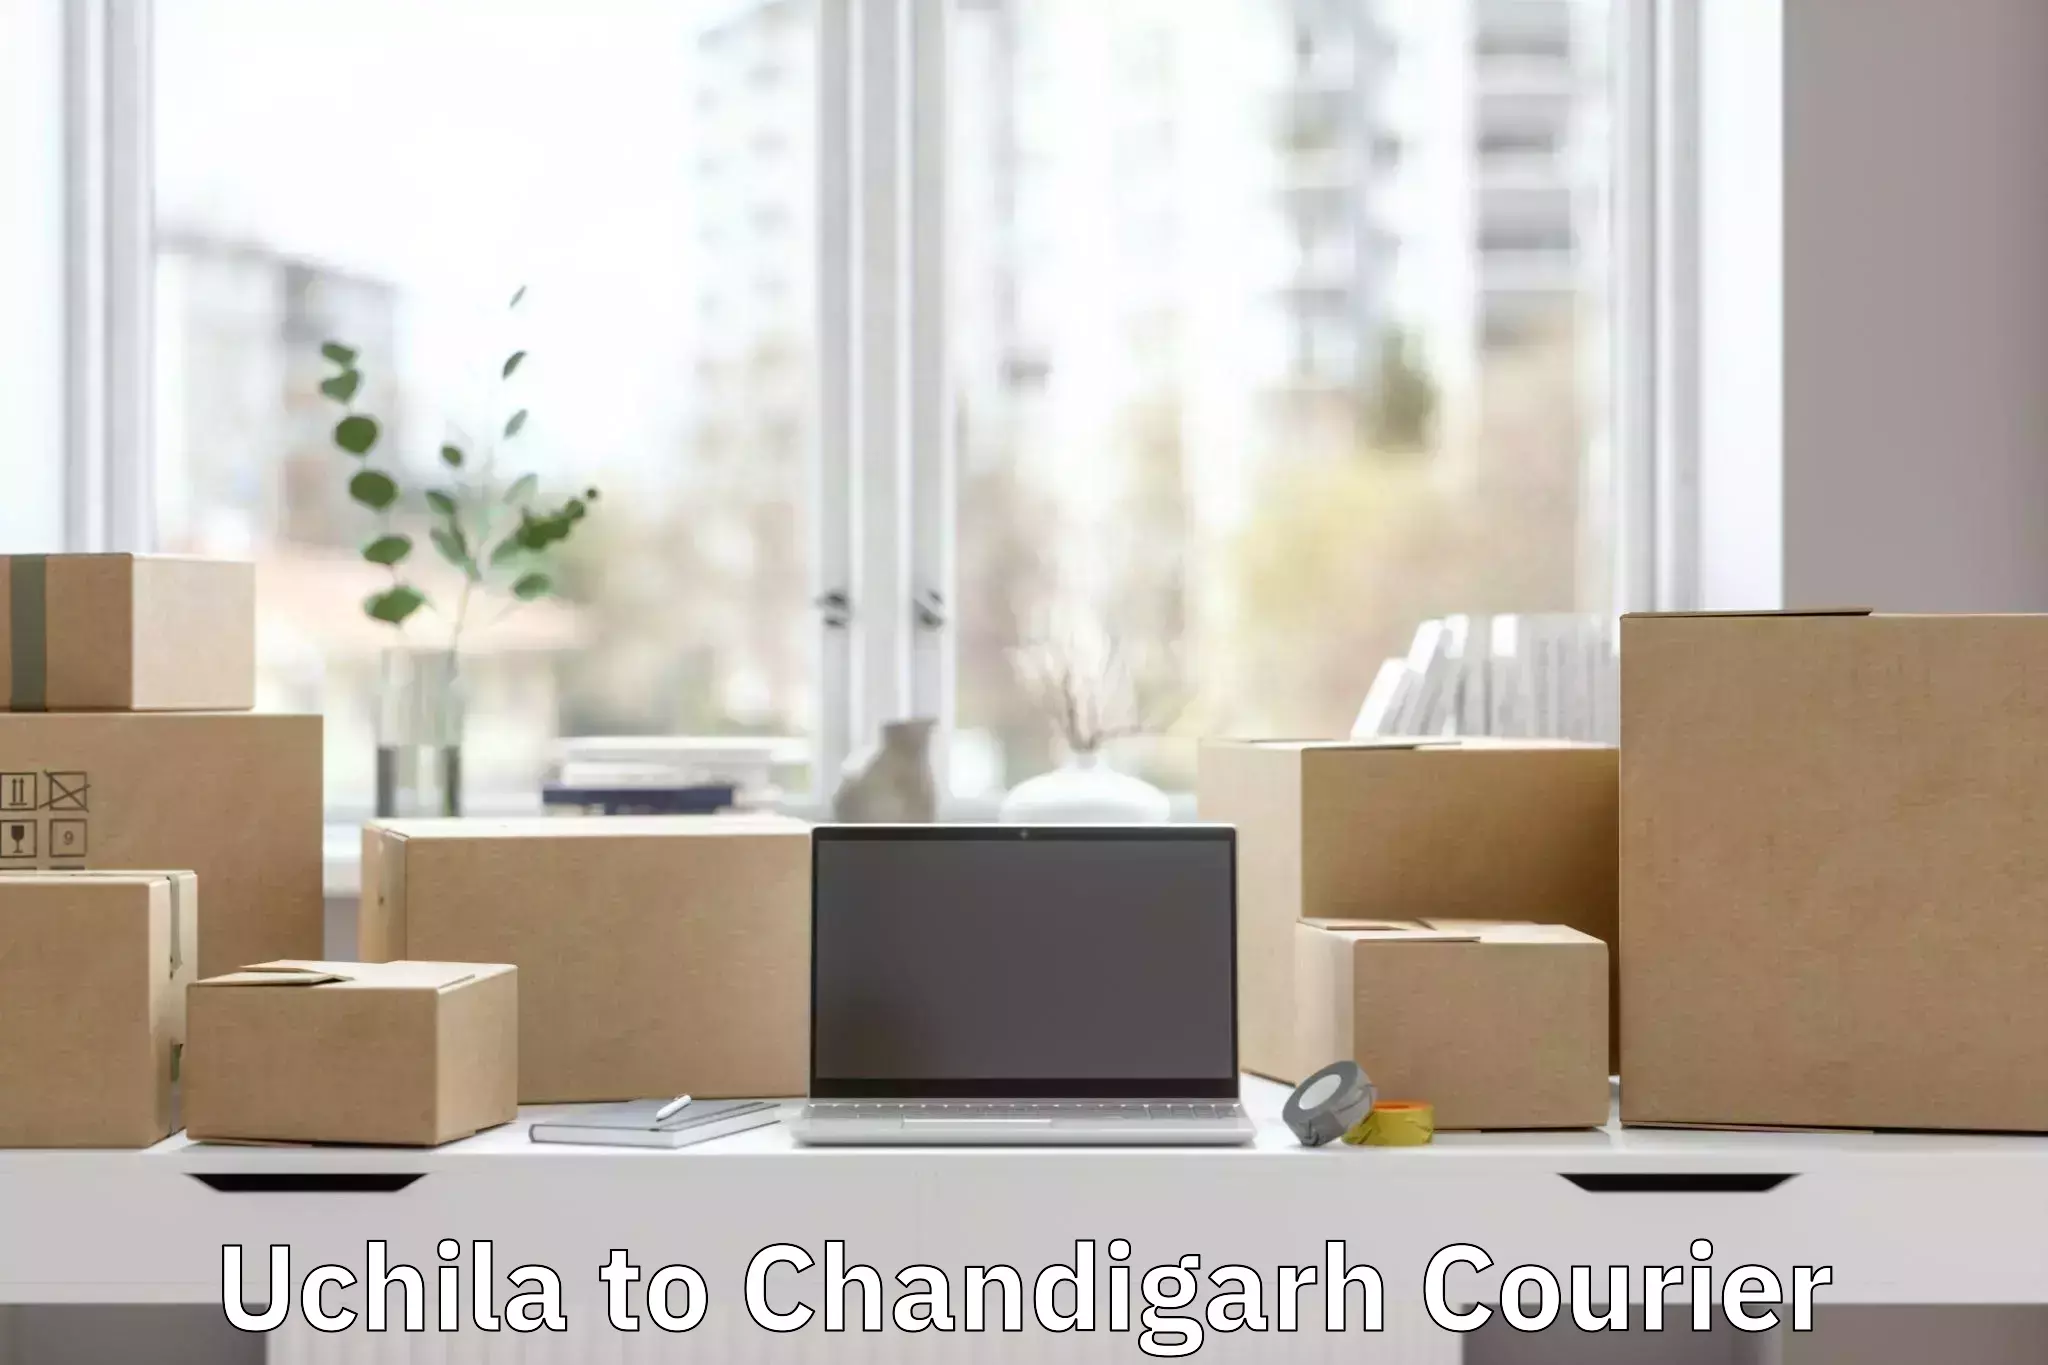 Online luggage shipping booking in Uchila to Chandigarh